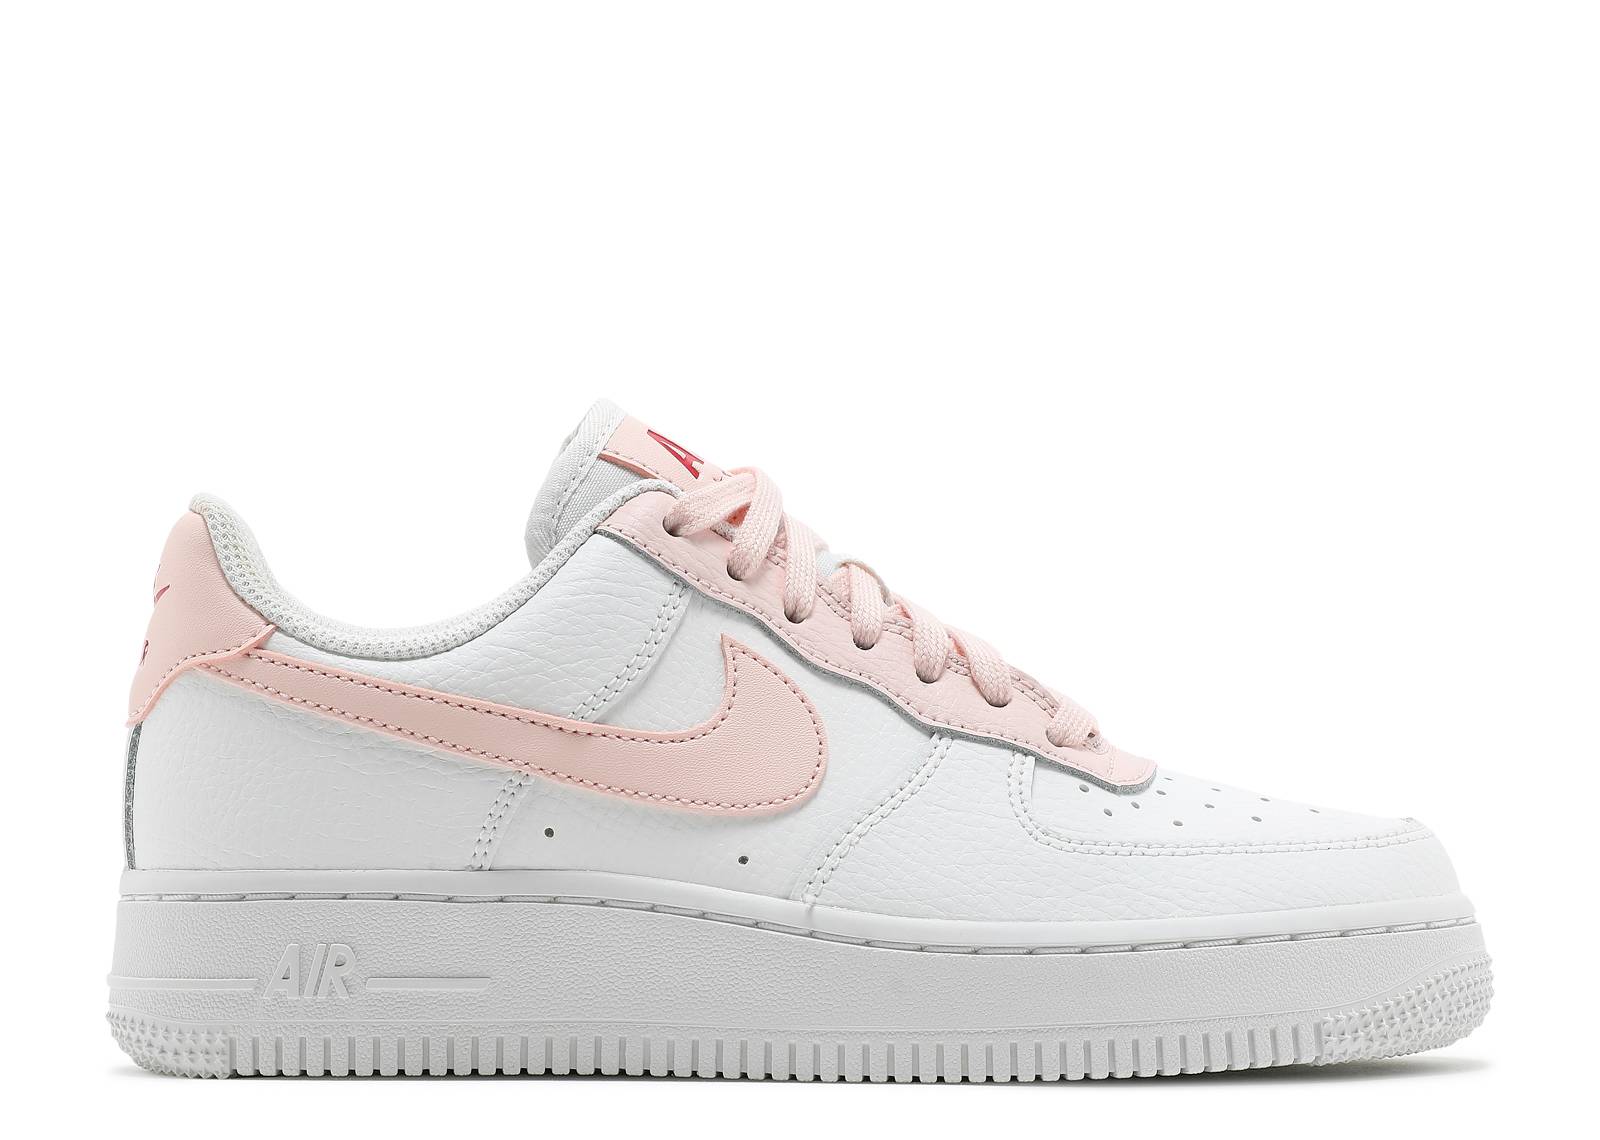 Wmns Air Force 1 '07 'White University Red'